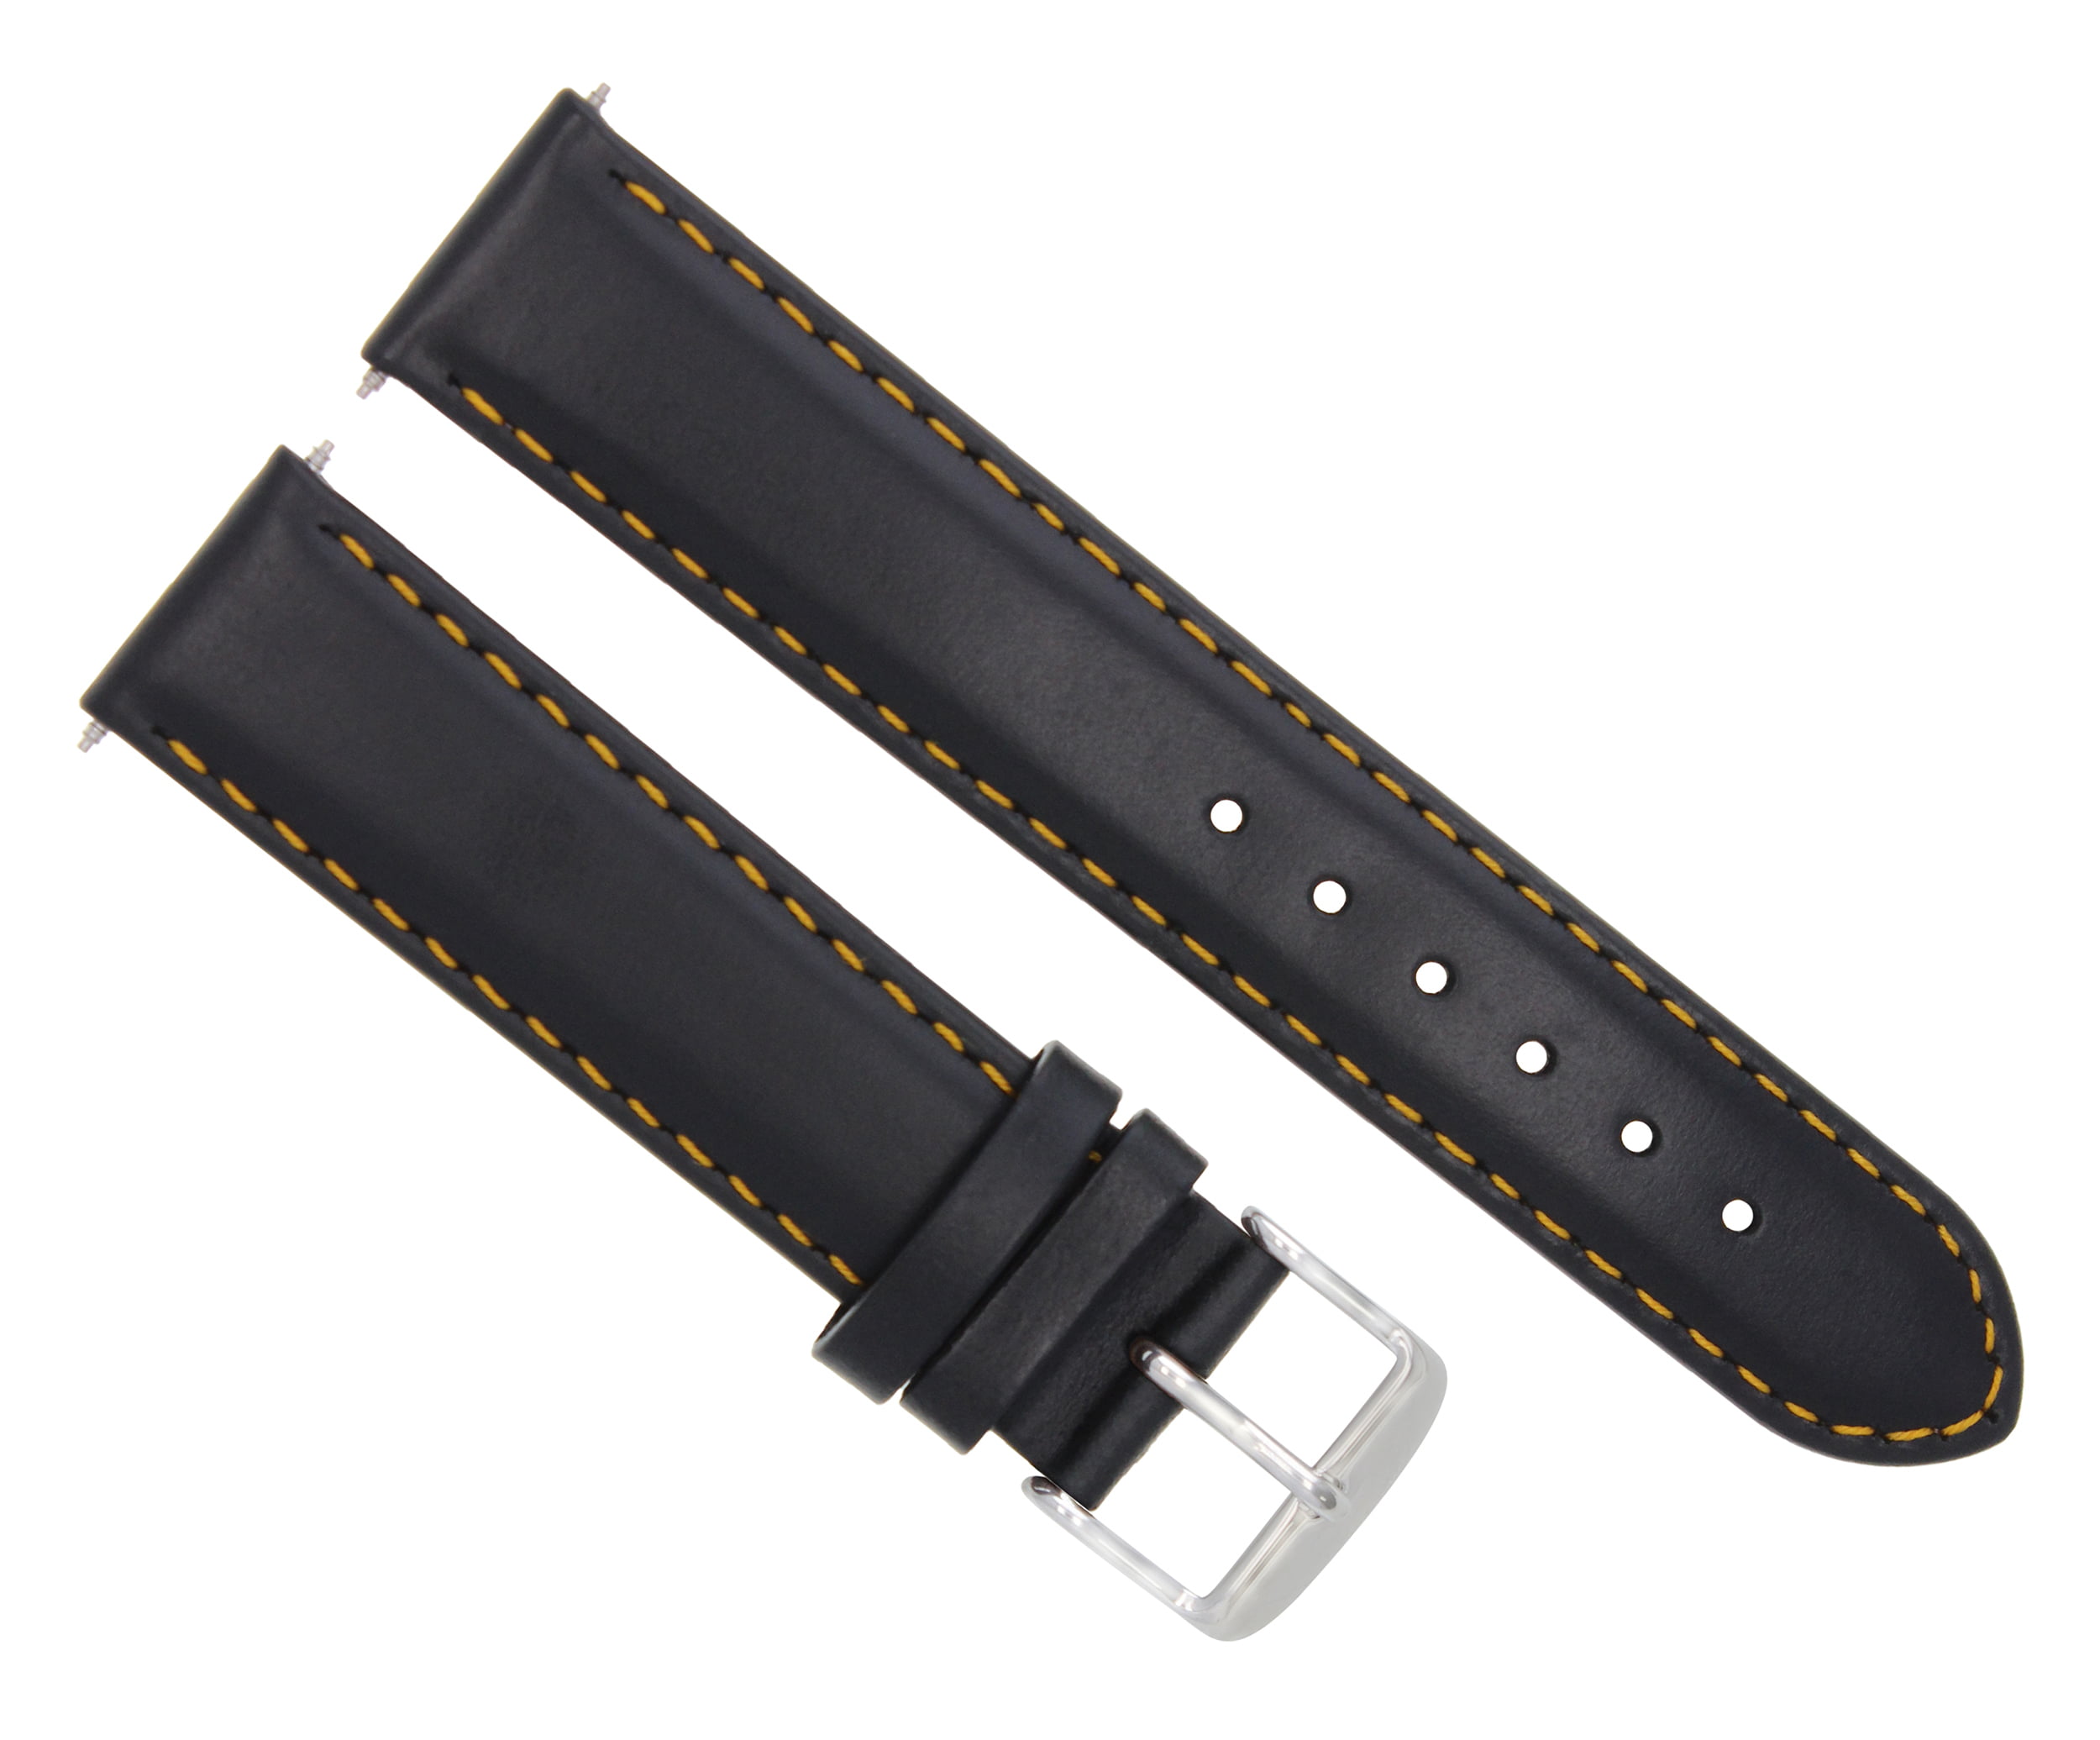 18MM SMOOTH LEATHER WATCH STRAP FOR LONGINES CONQUEST WATCH BLACK ORANGE ST - Walmart.com